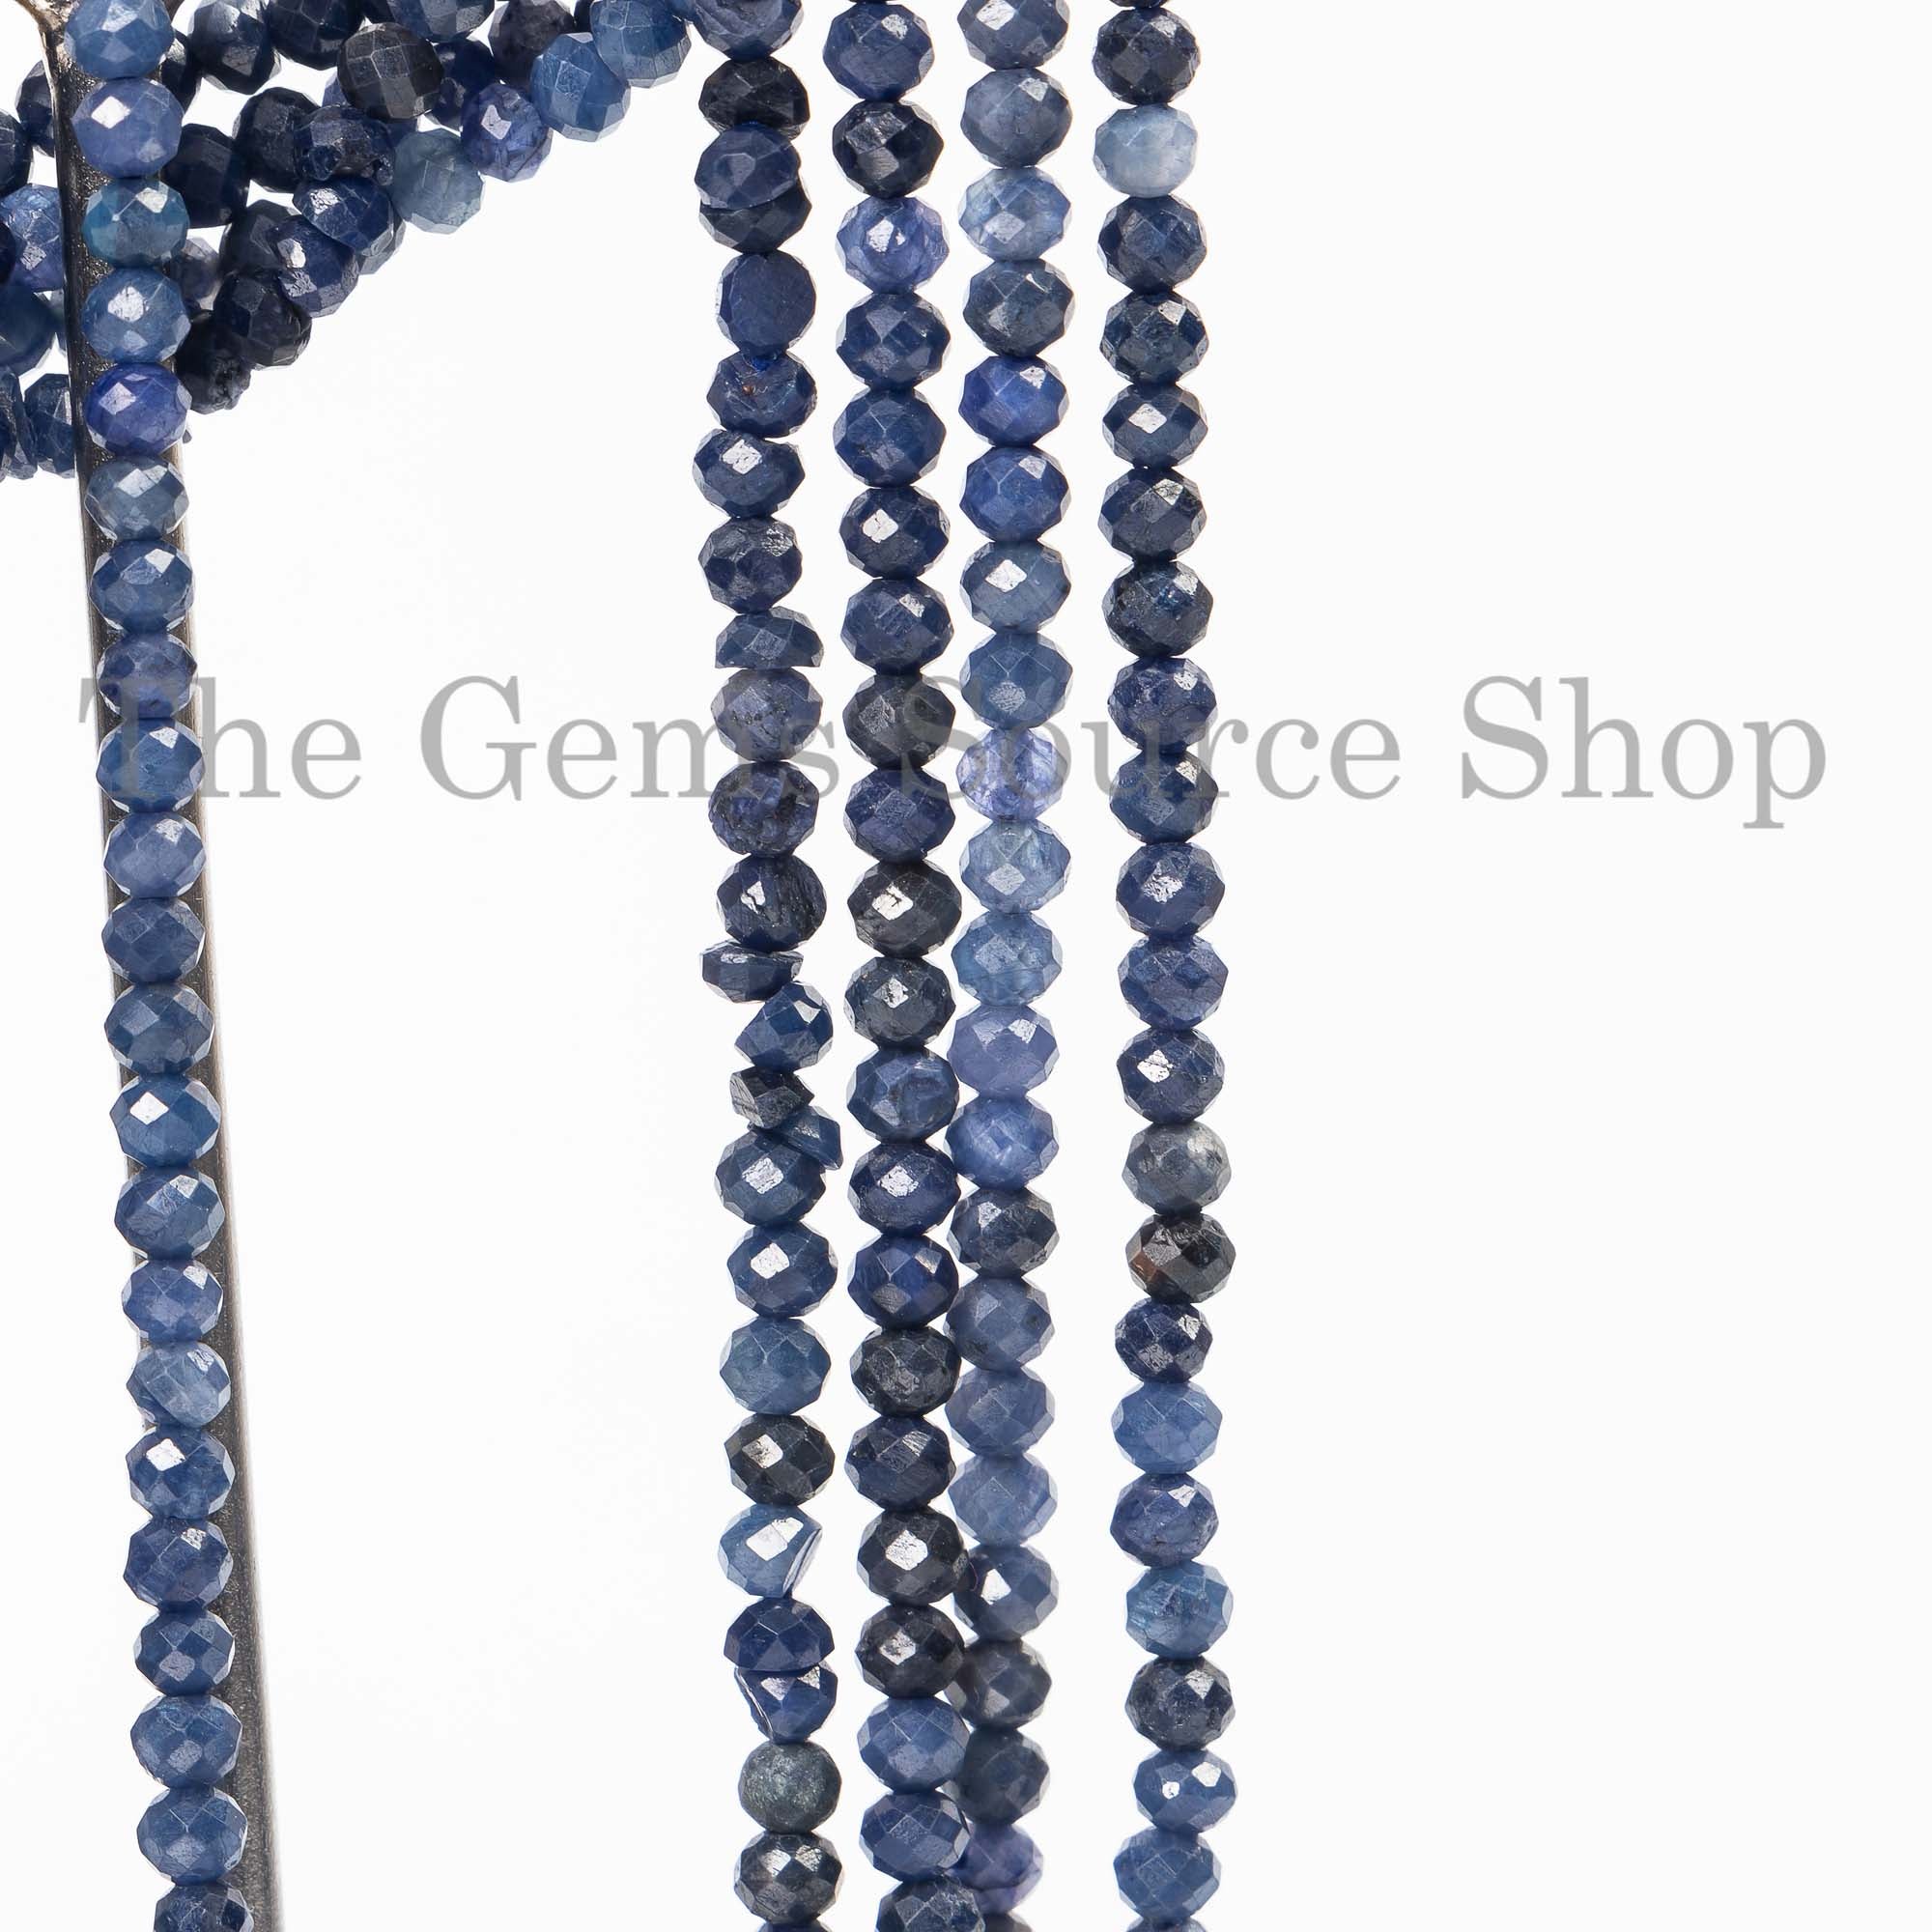 2.5-3.5mm Blue Sapphire Rondelle Beads, Sapphire Faceted Beads, Sapphire Beads, Blue Sapphire Beads, Gemstone Rondelle, Beads For Jewelry